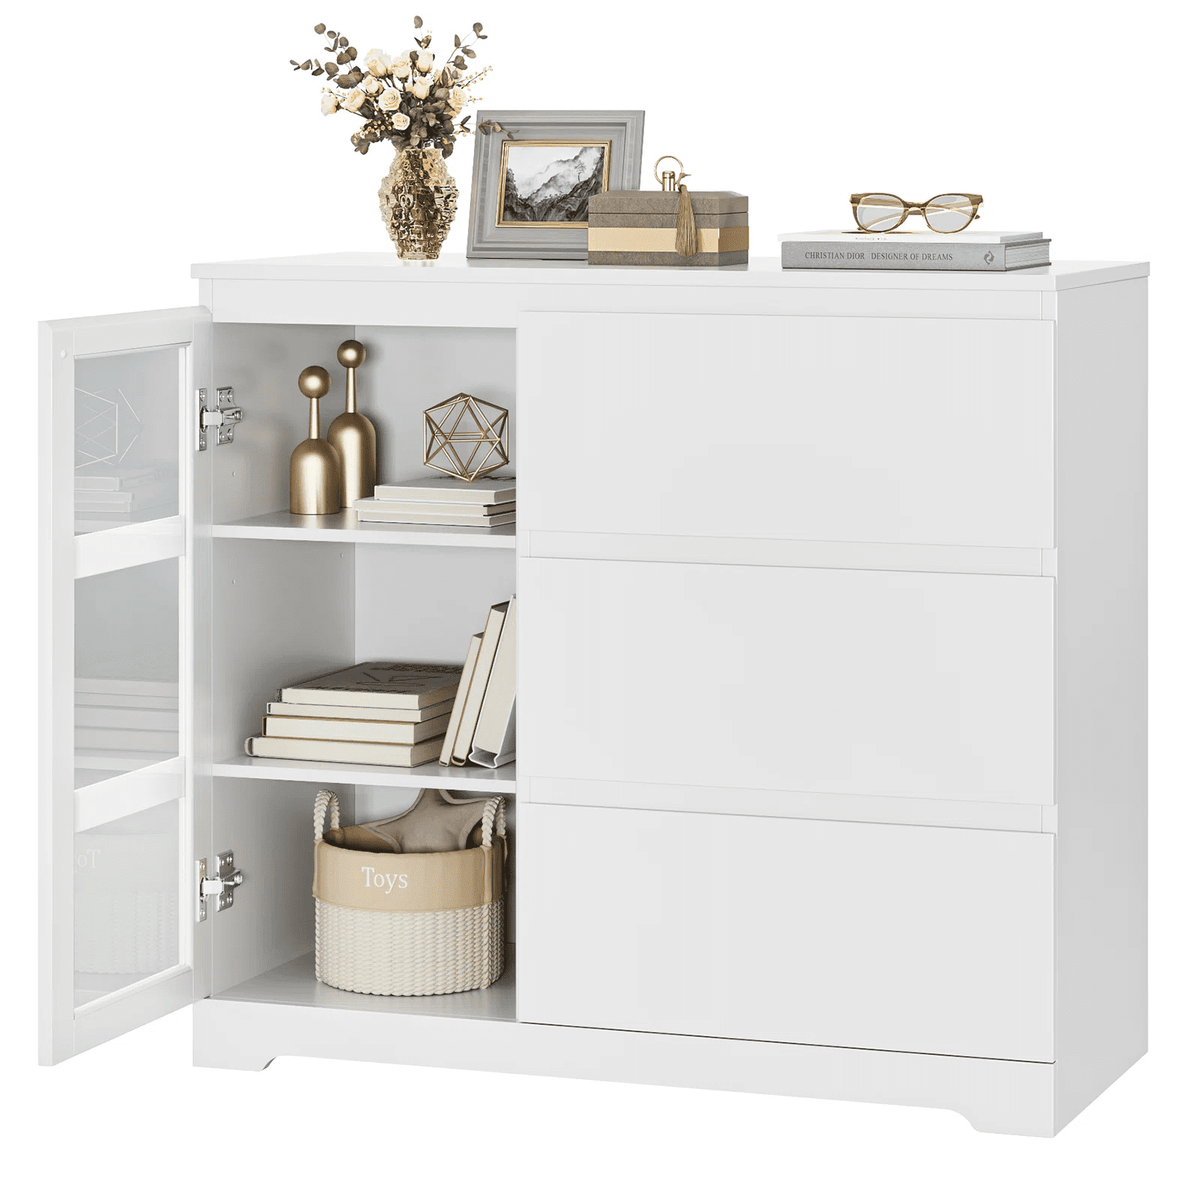 Homfa 3-Drawer Kitchen Storage Cabinet, 76.6'' Tall Cabinet with Clear  Glass Door for Bathroom, White 